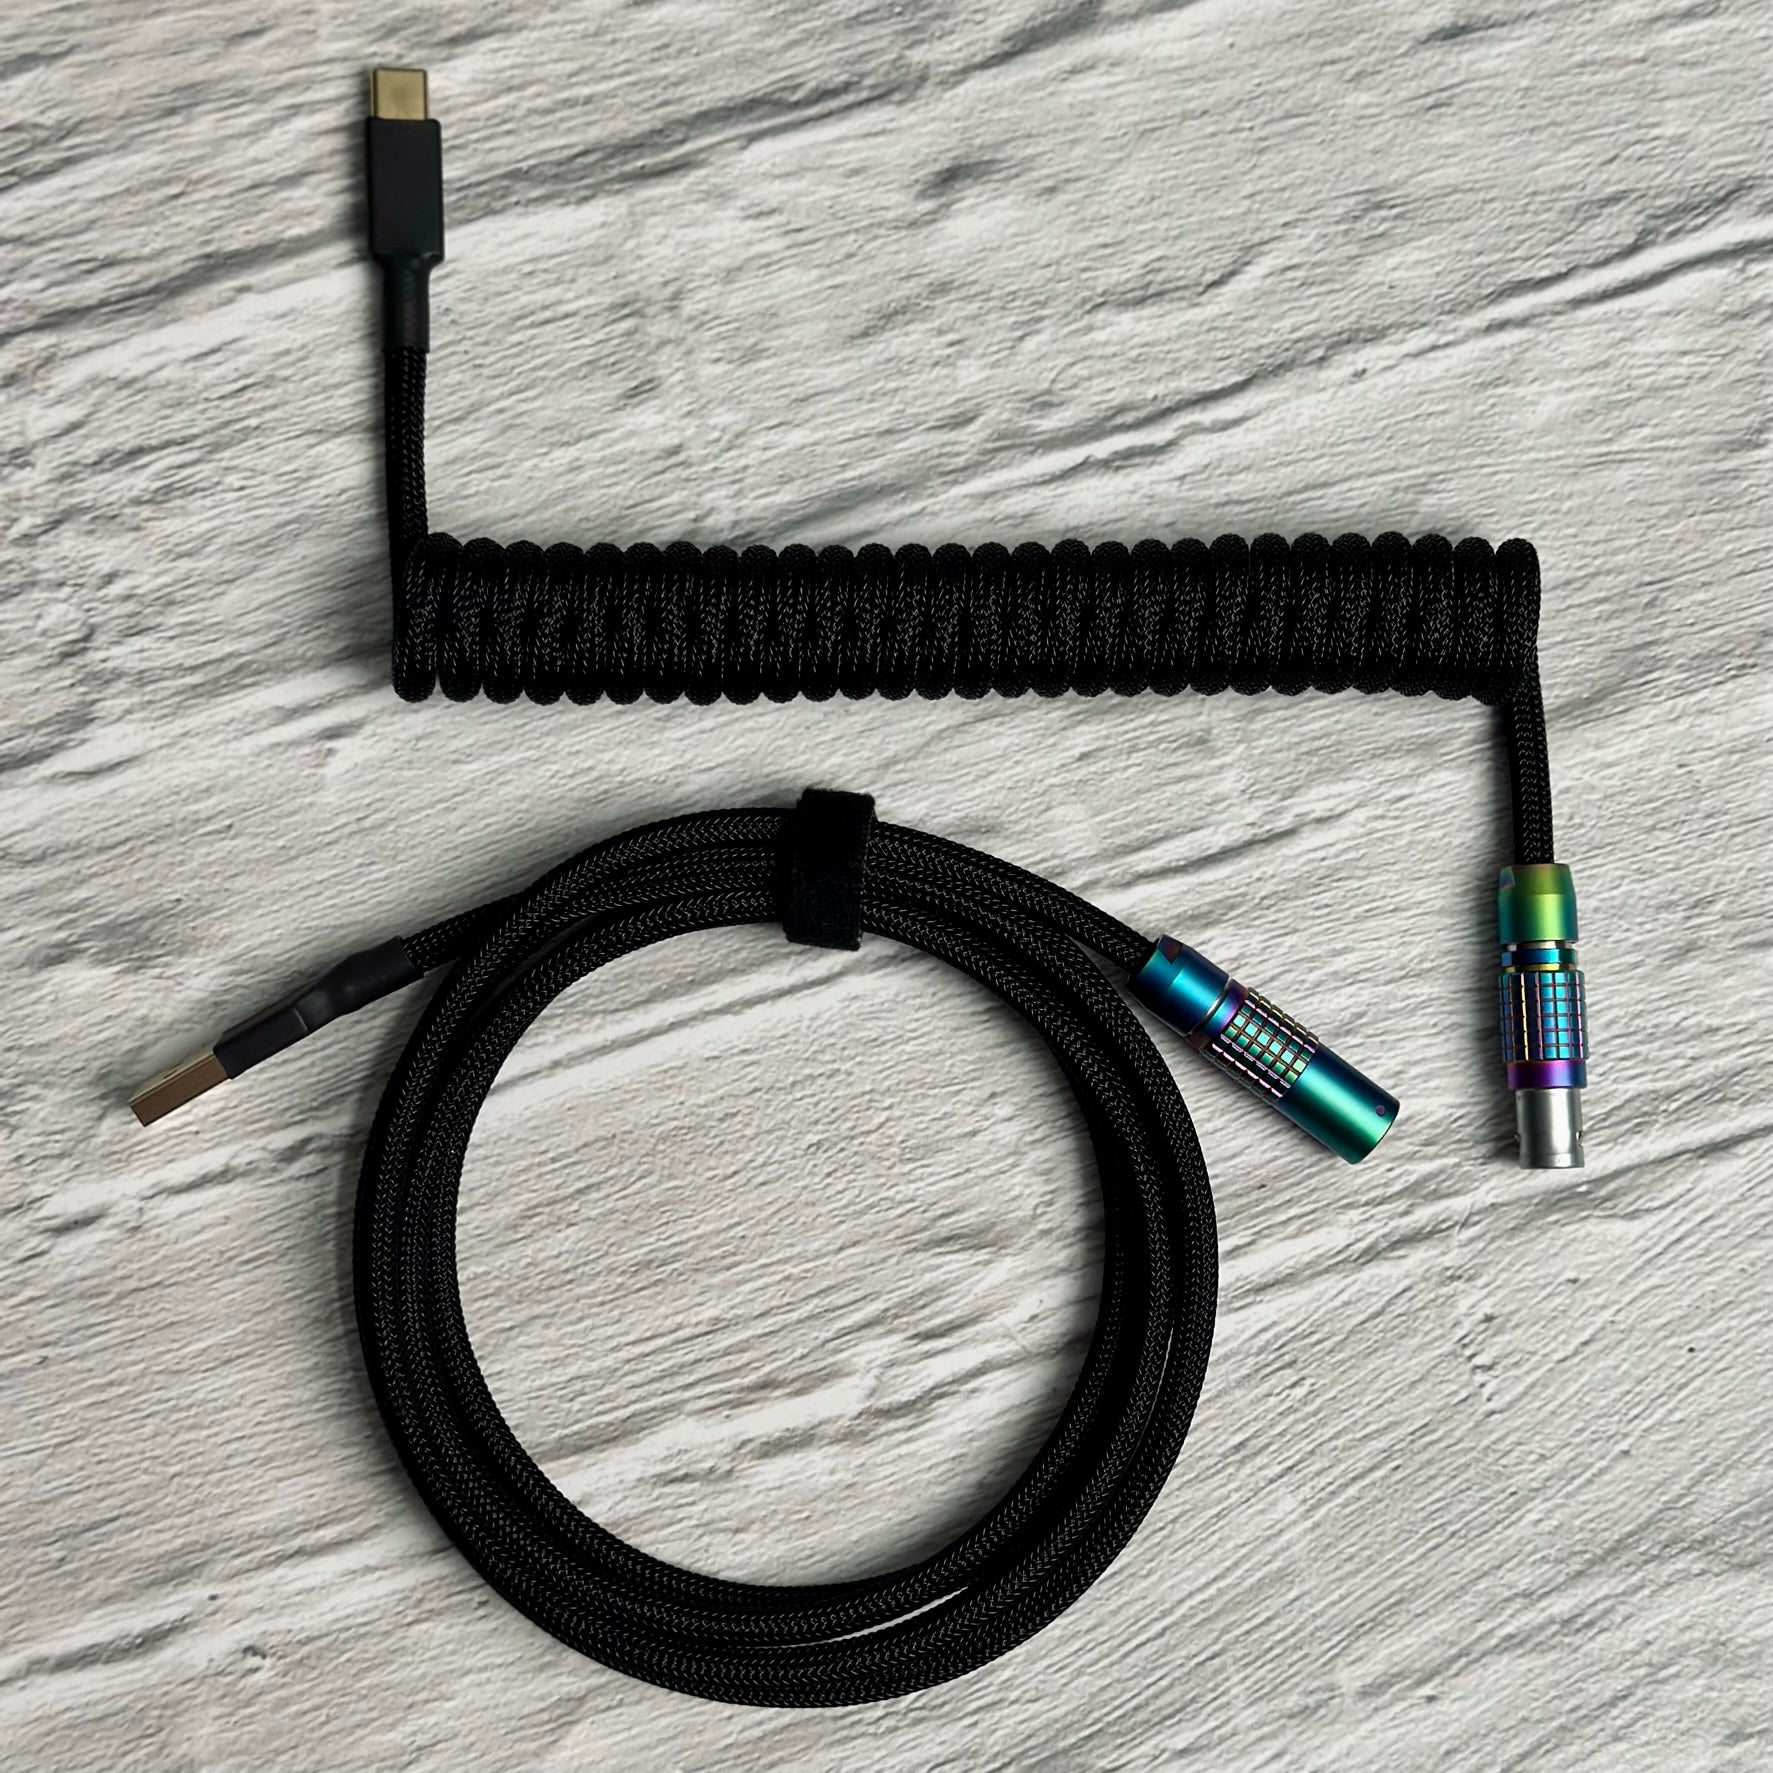 Birdseye view of coiled mechanical keyboard cable with black Teleios sleeving, black TechFlex second layer, and rainbow FEMO connector